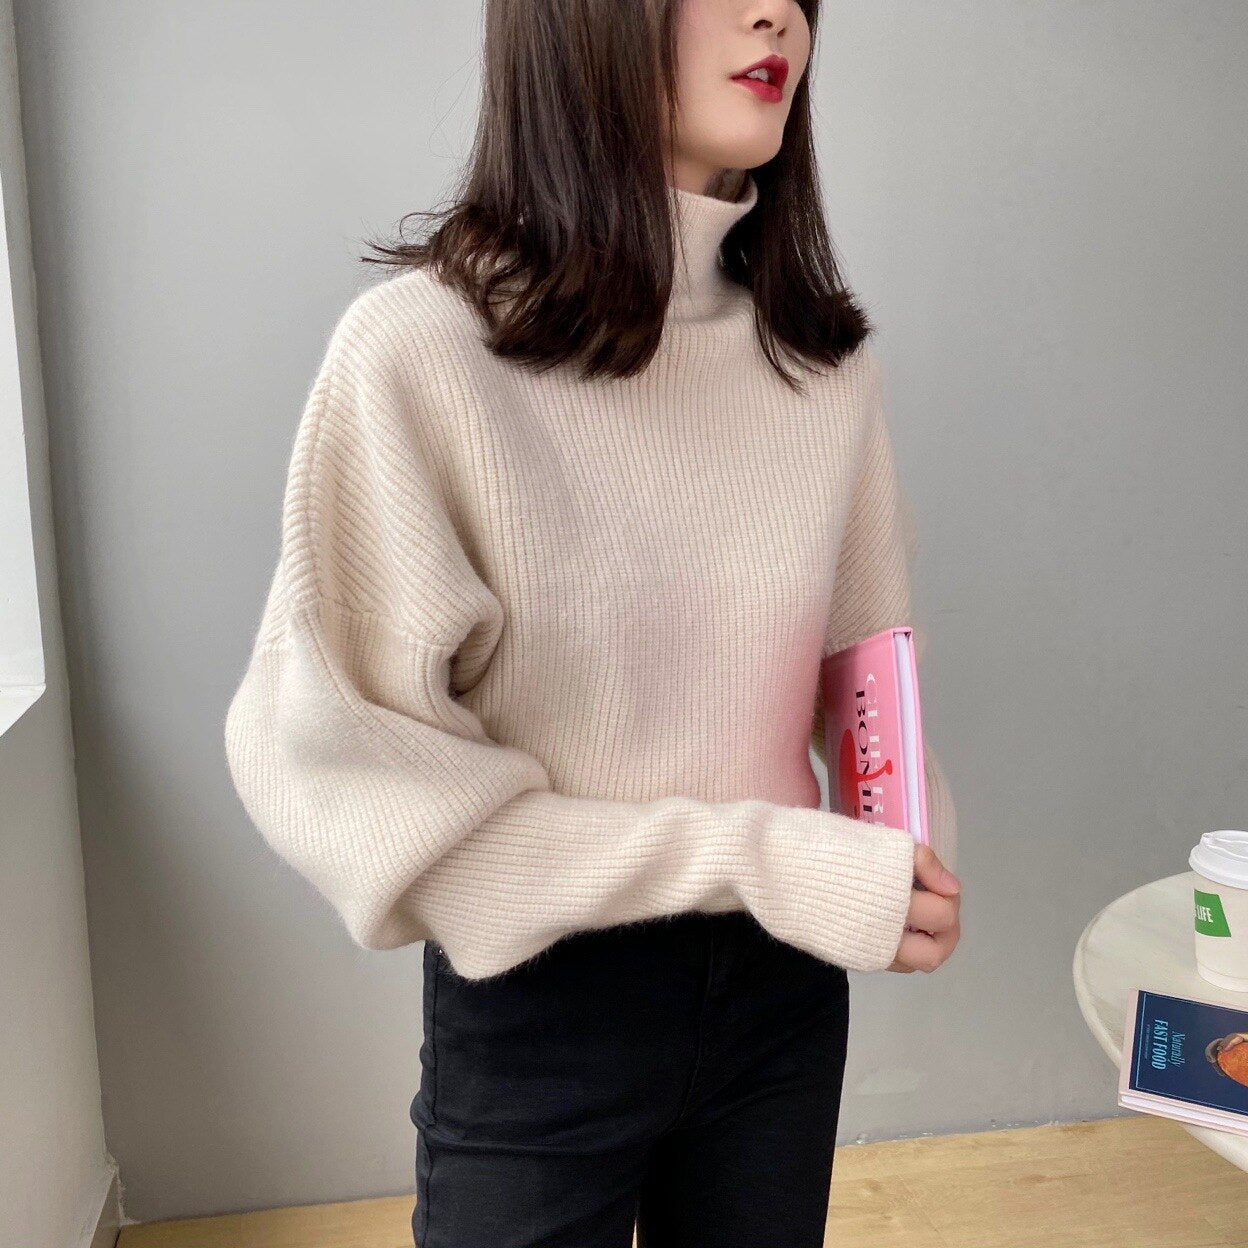 Autumn Women Pullovers Turtleneck Long Sleeve Loose Sweater Cropped Tops Pull Outwear